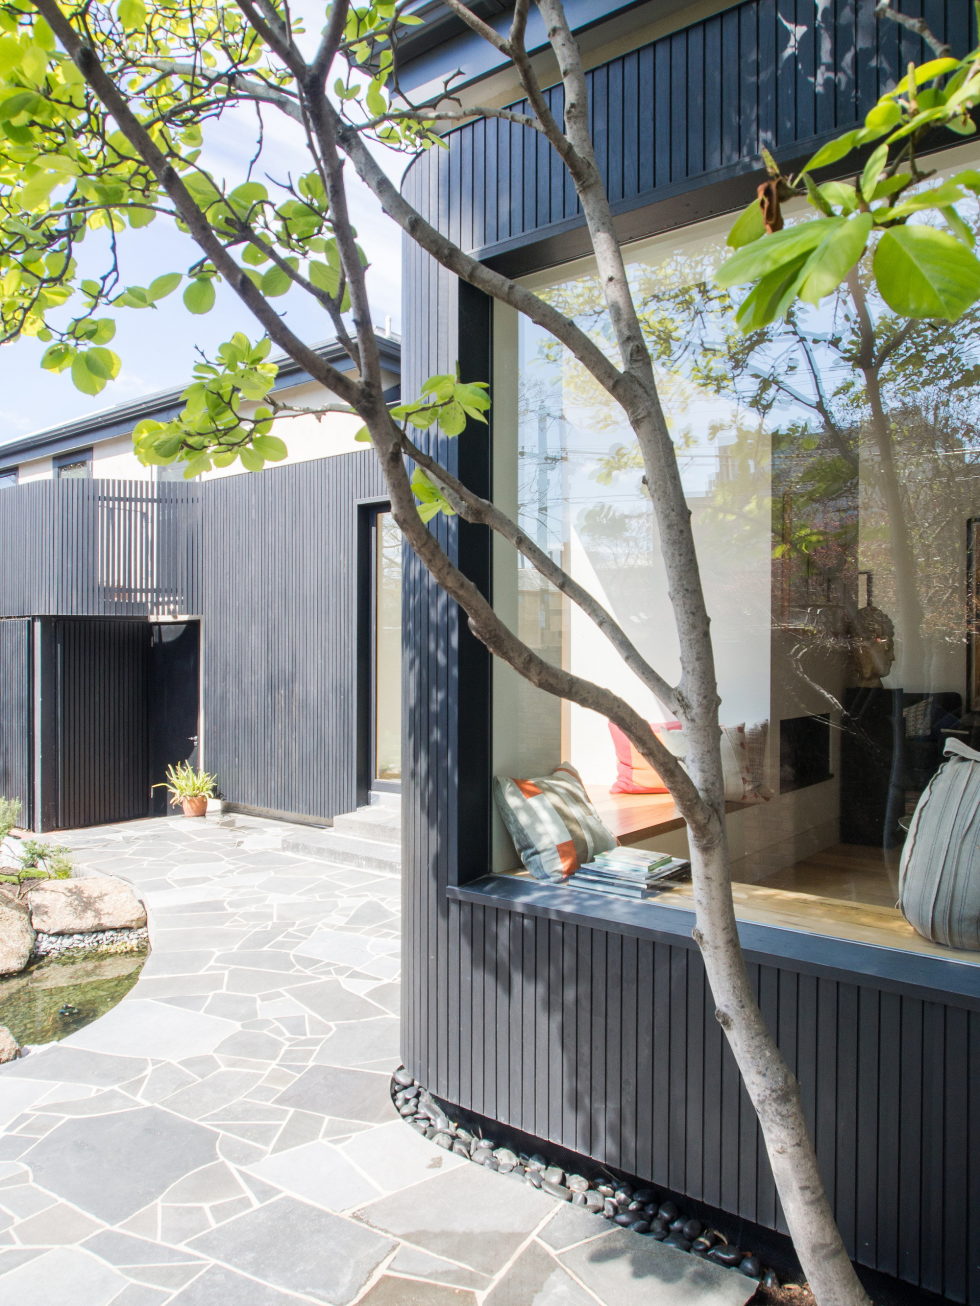 Merton Private Residency In Australia Combination Of Victorian And Modern Architecture 10